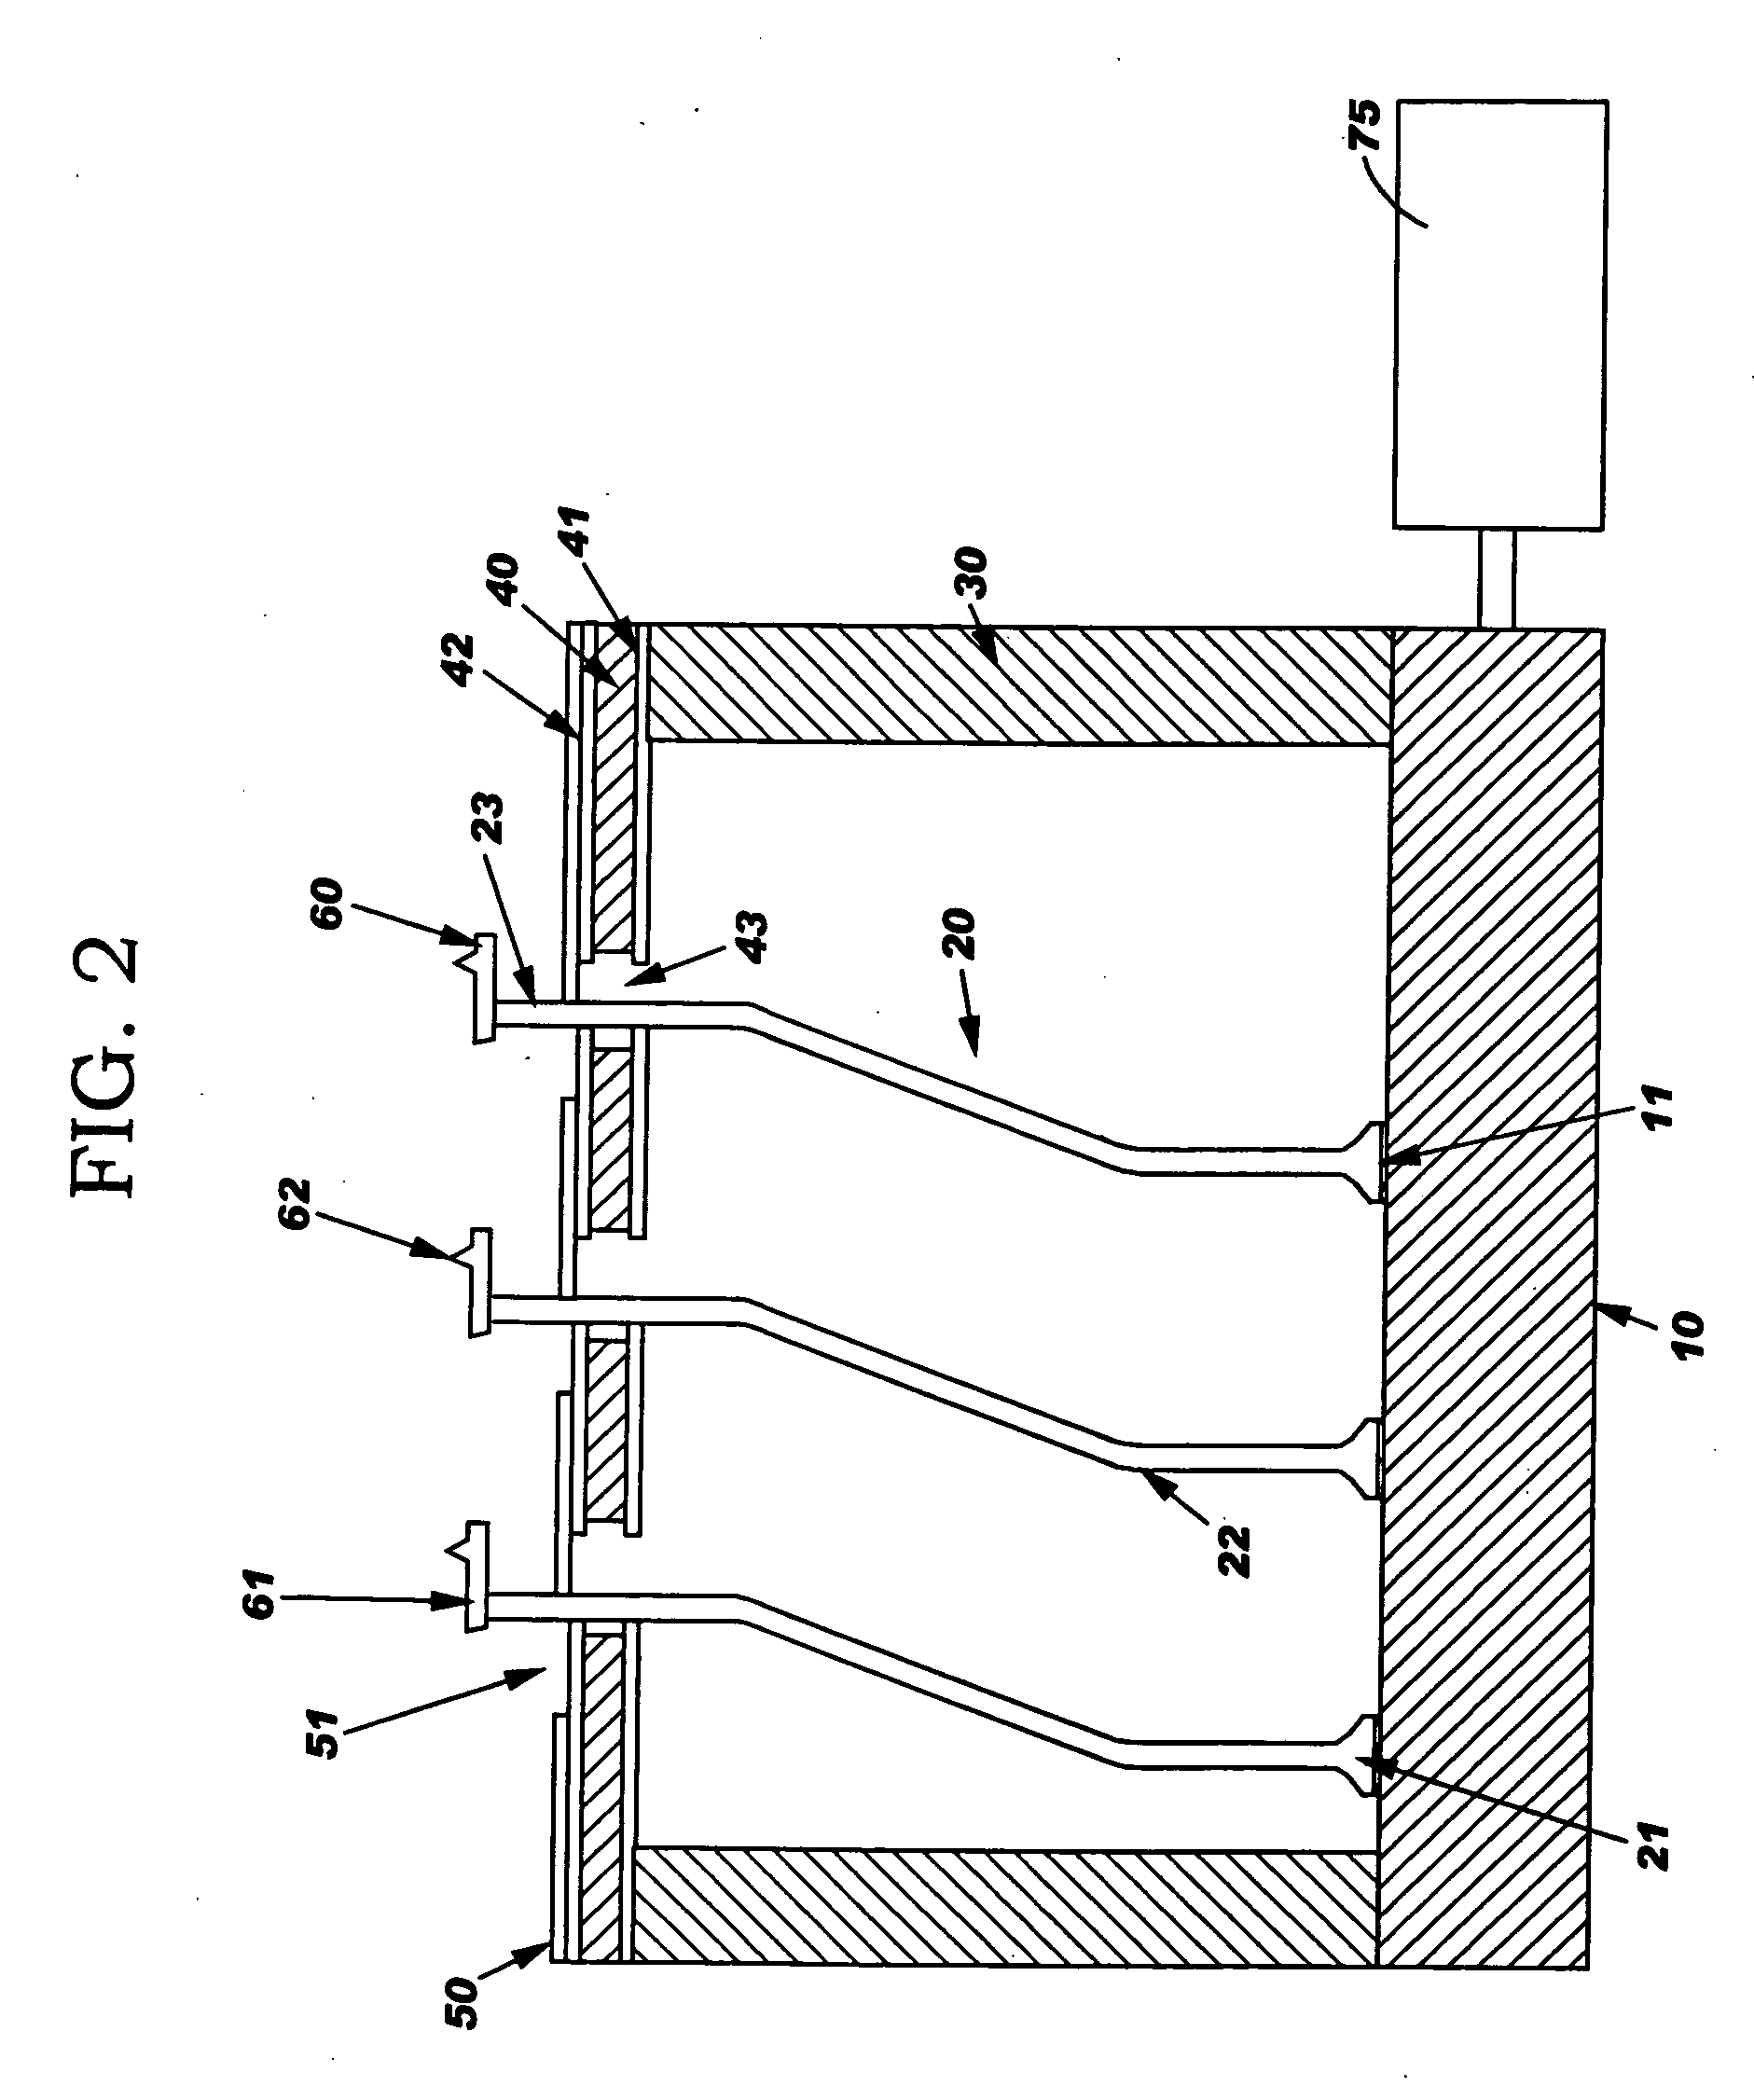 Electrical connector design and contact geometry and method of use thereof and methods of fabrication thereof